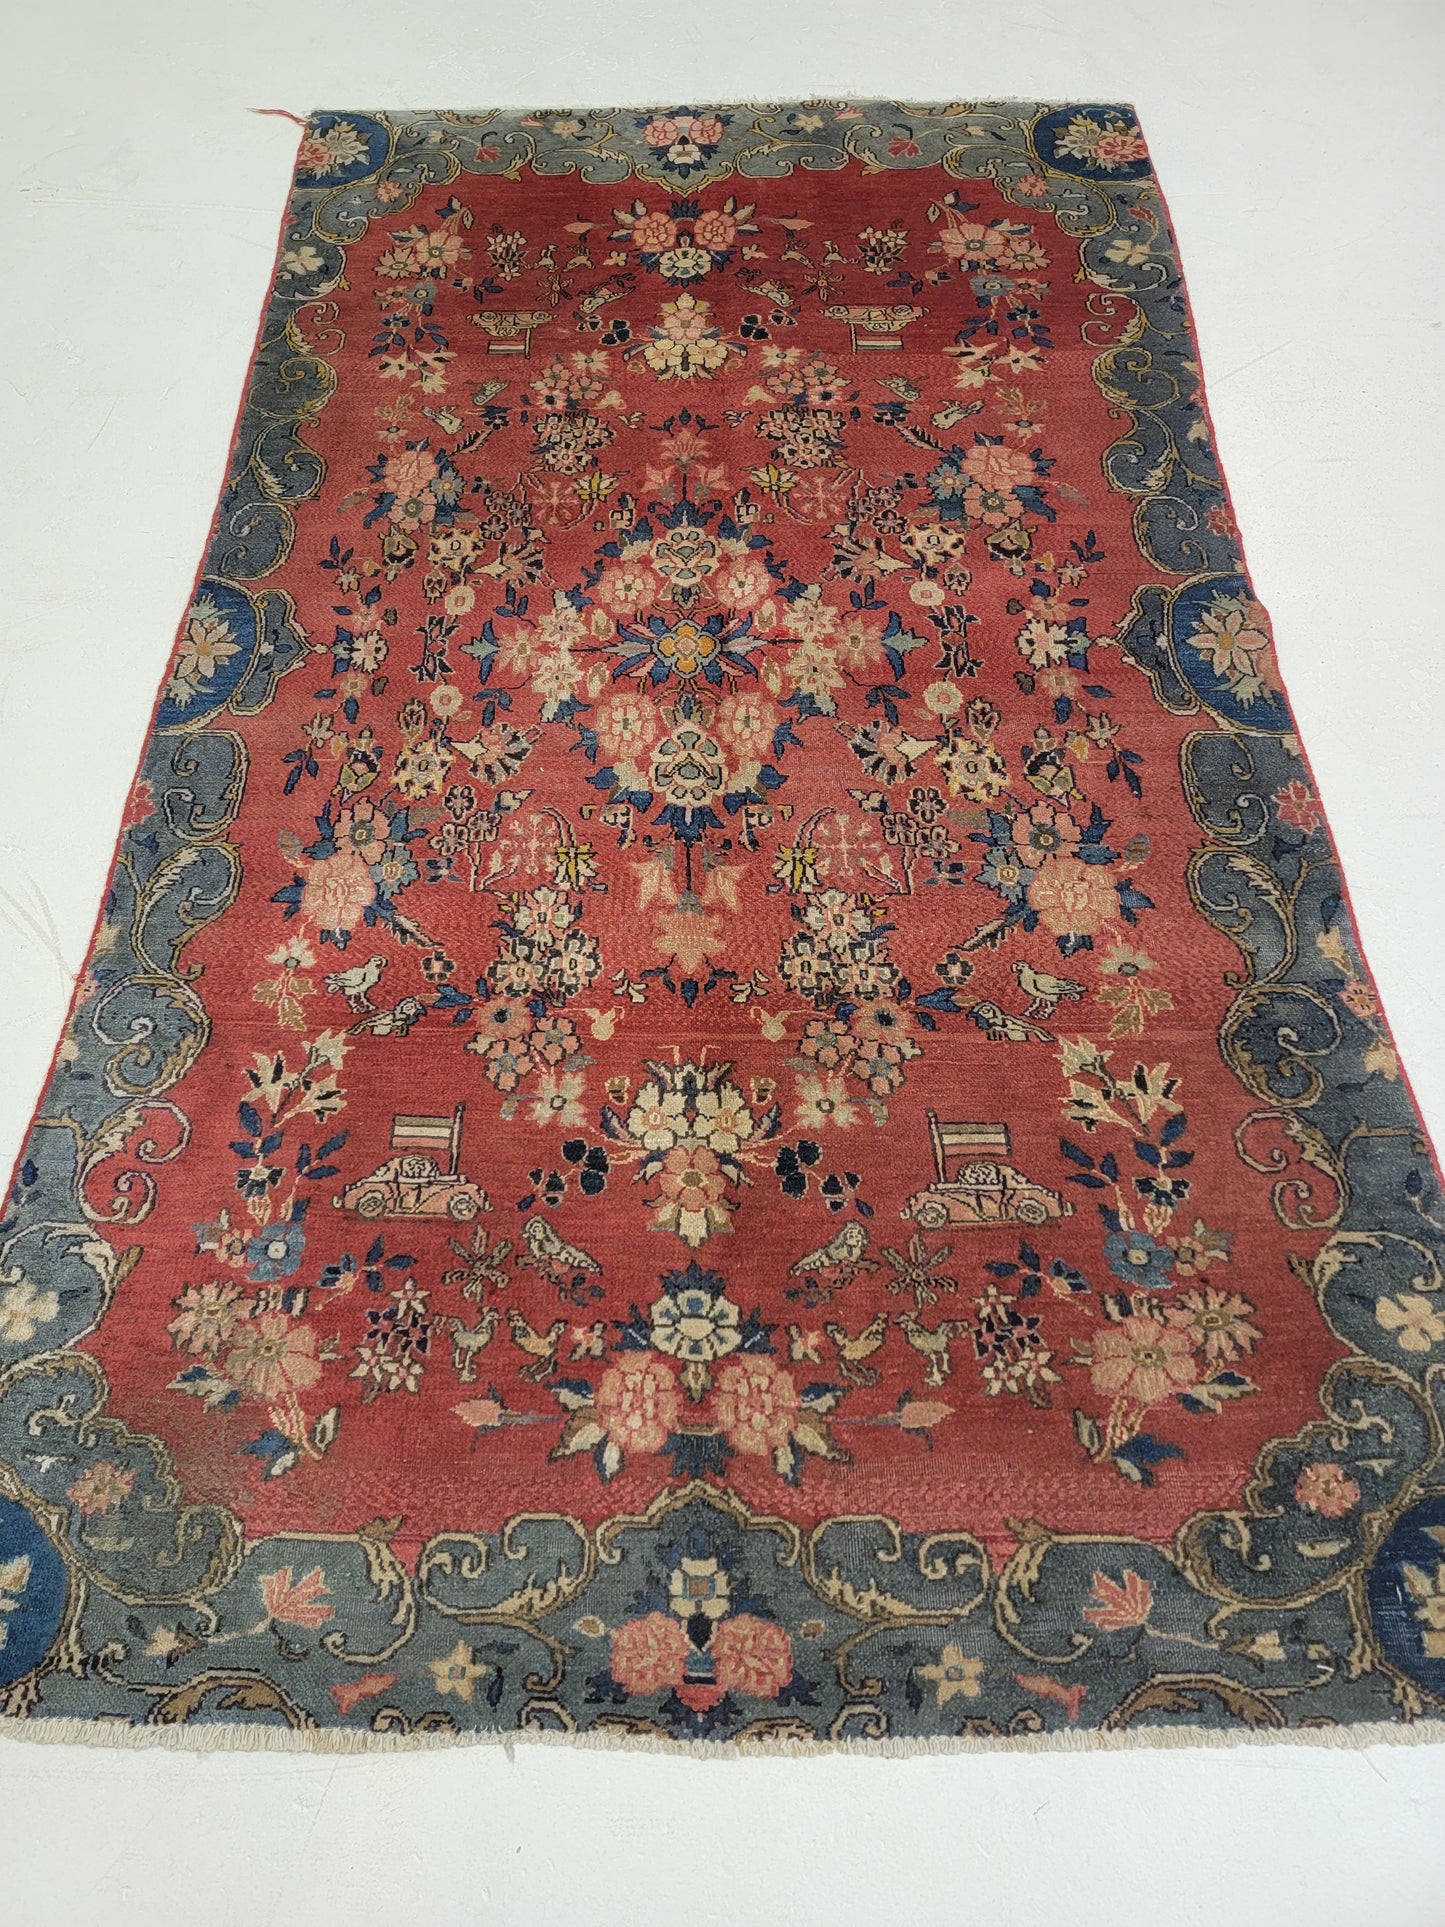 Antique Hand-Knotted Wool Area Rug Bijar Colletible 3'7" x 6'5"